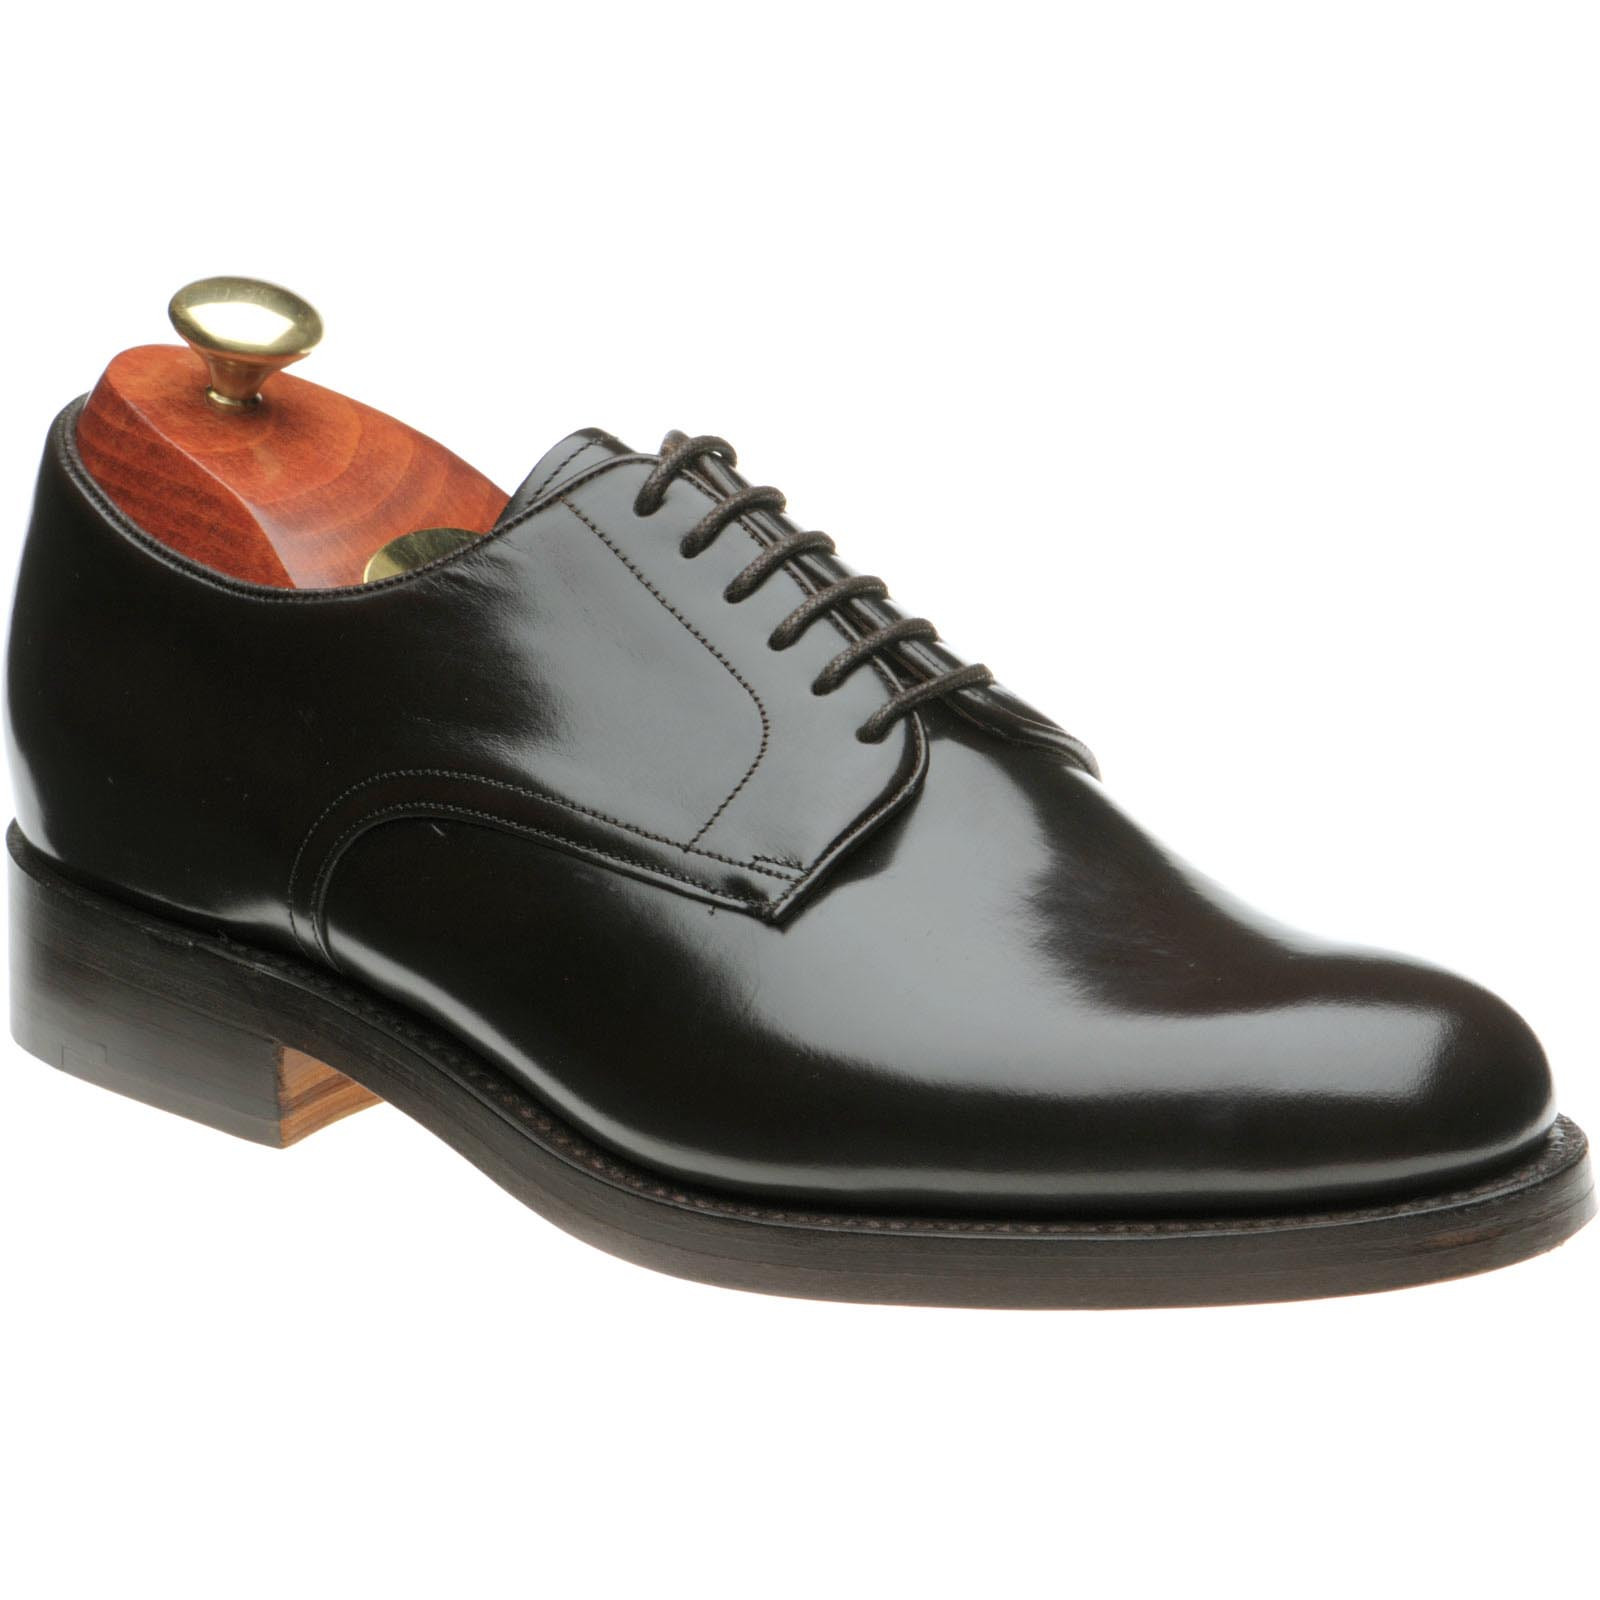 Barker shoes | Barker Factory Seconds | 4069 Derby shoes in Brown ...